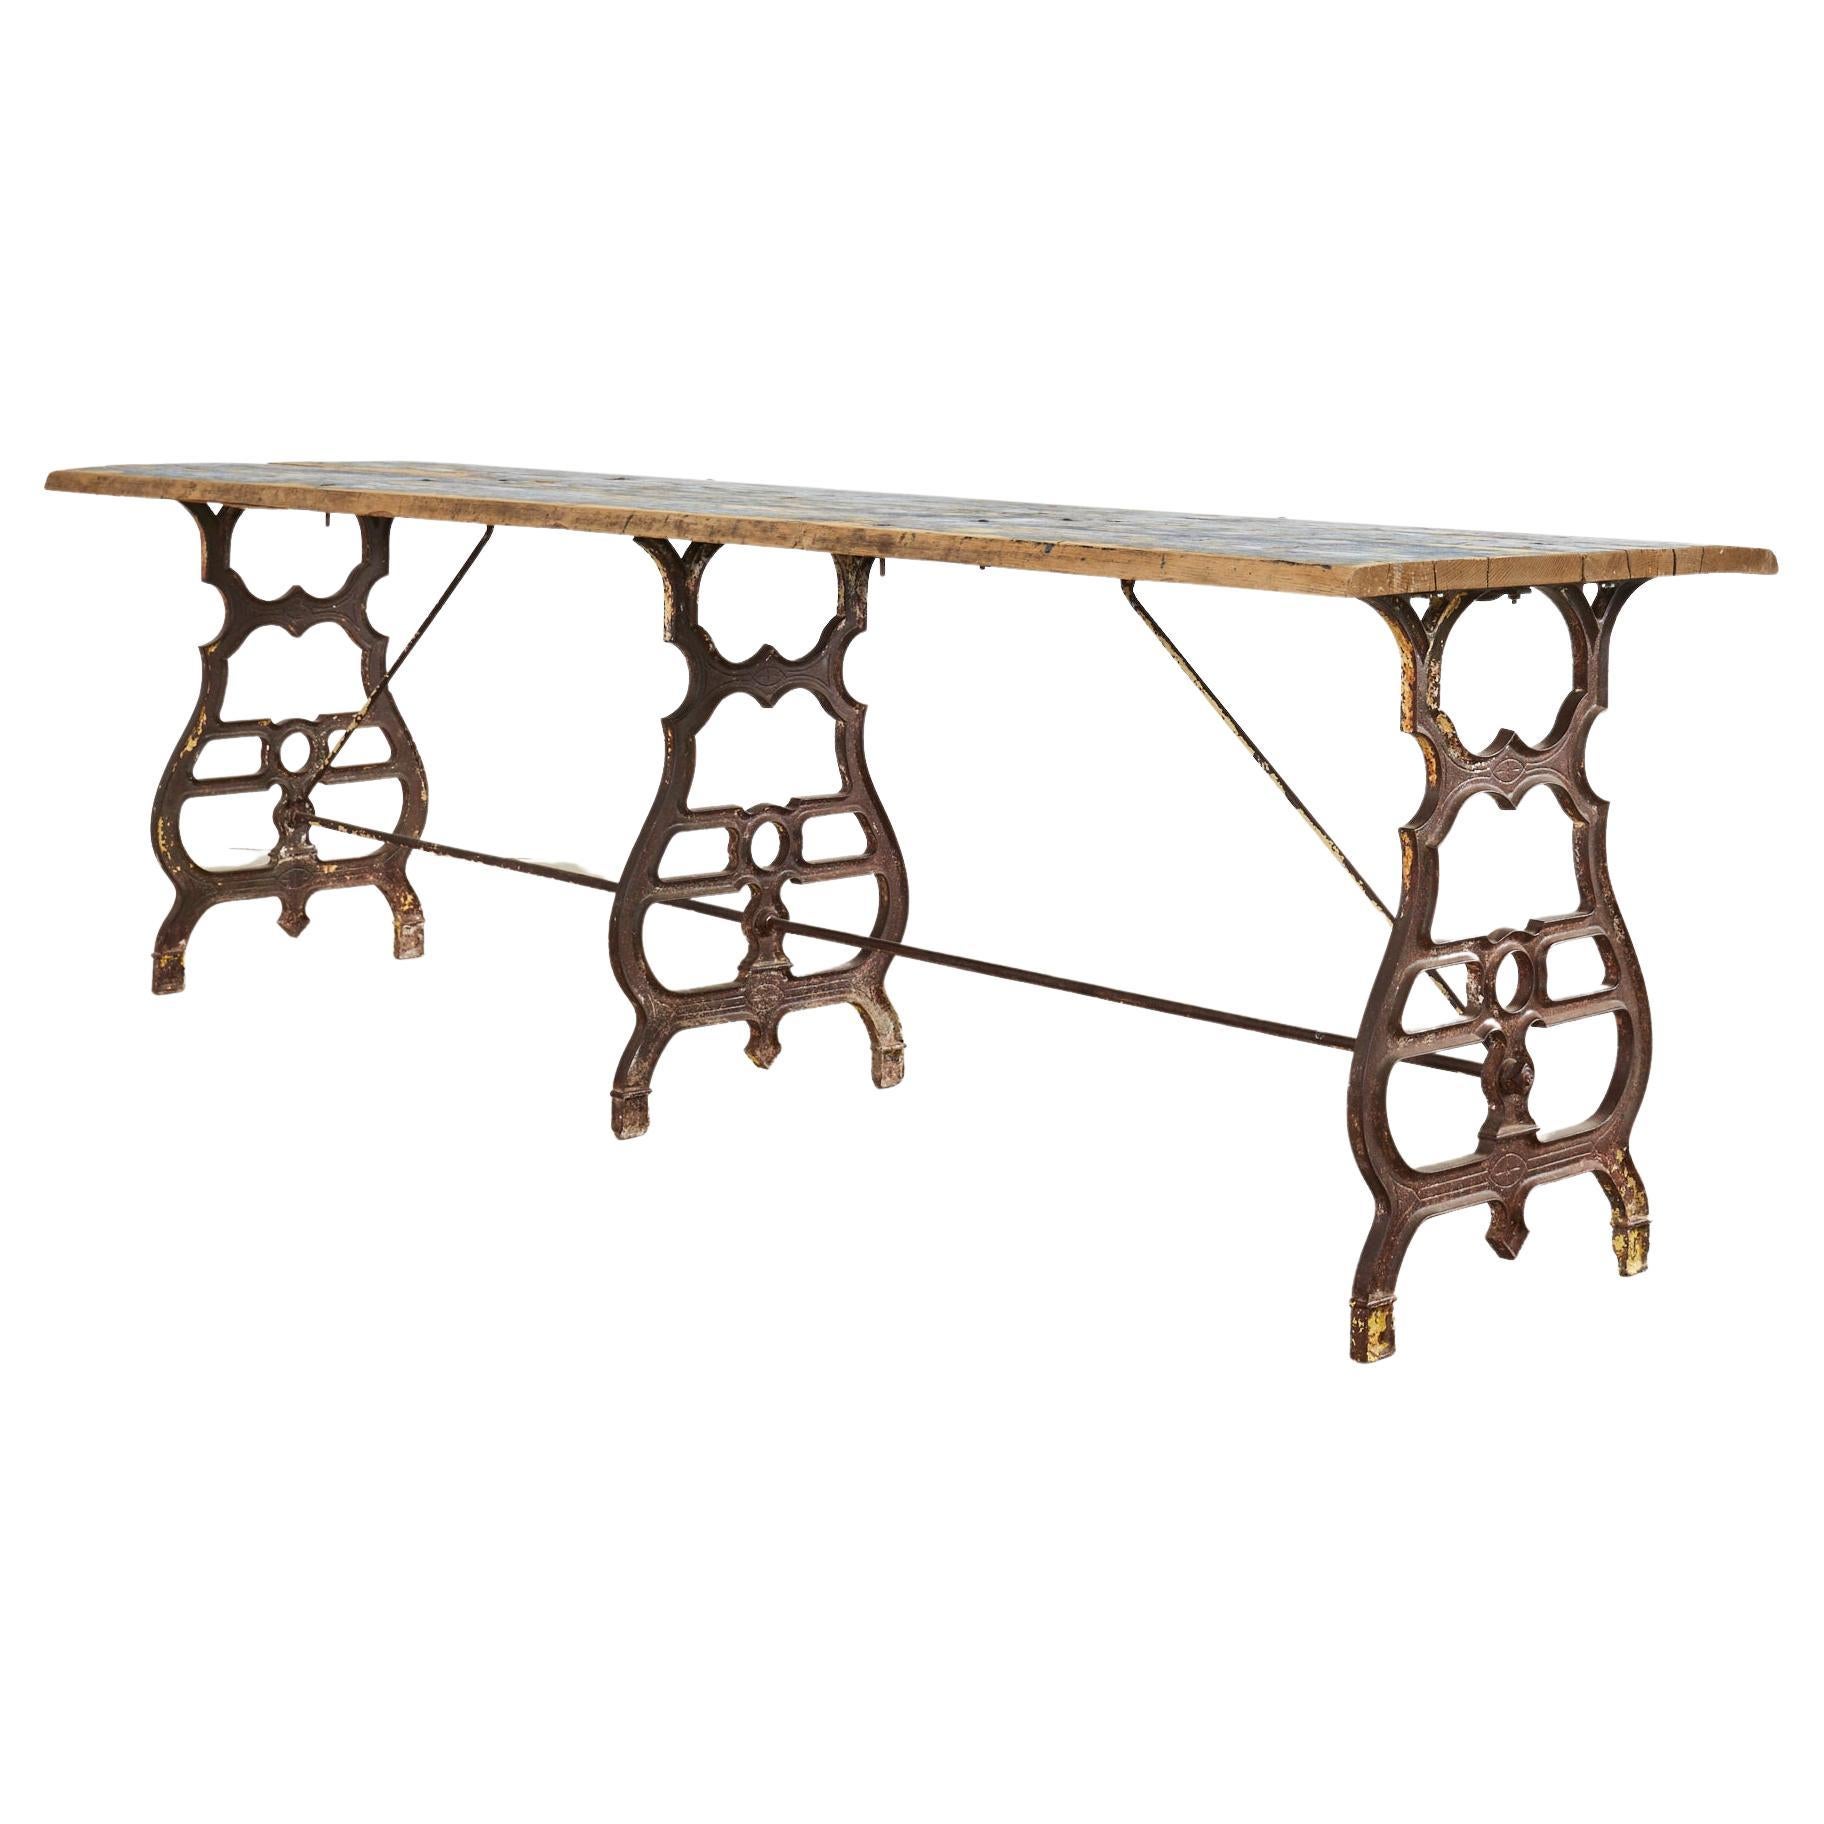 19th Century French Industrial Style Pine Iron Dining Table For Sale